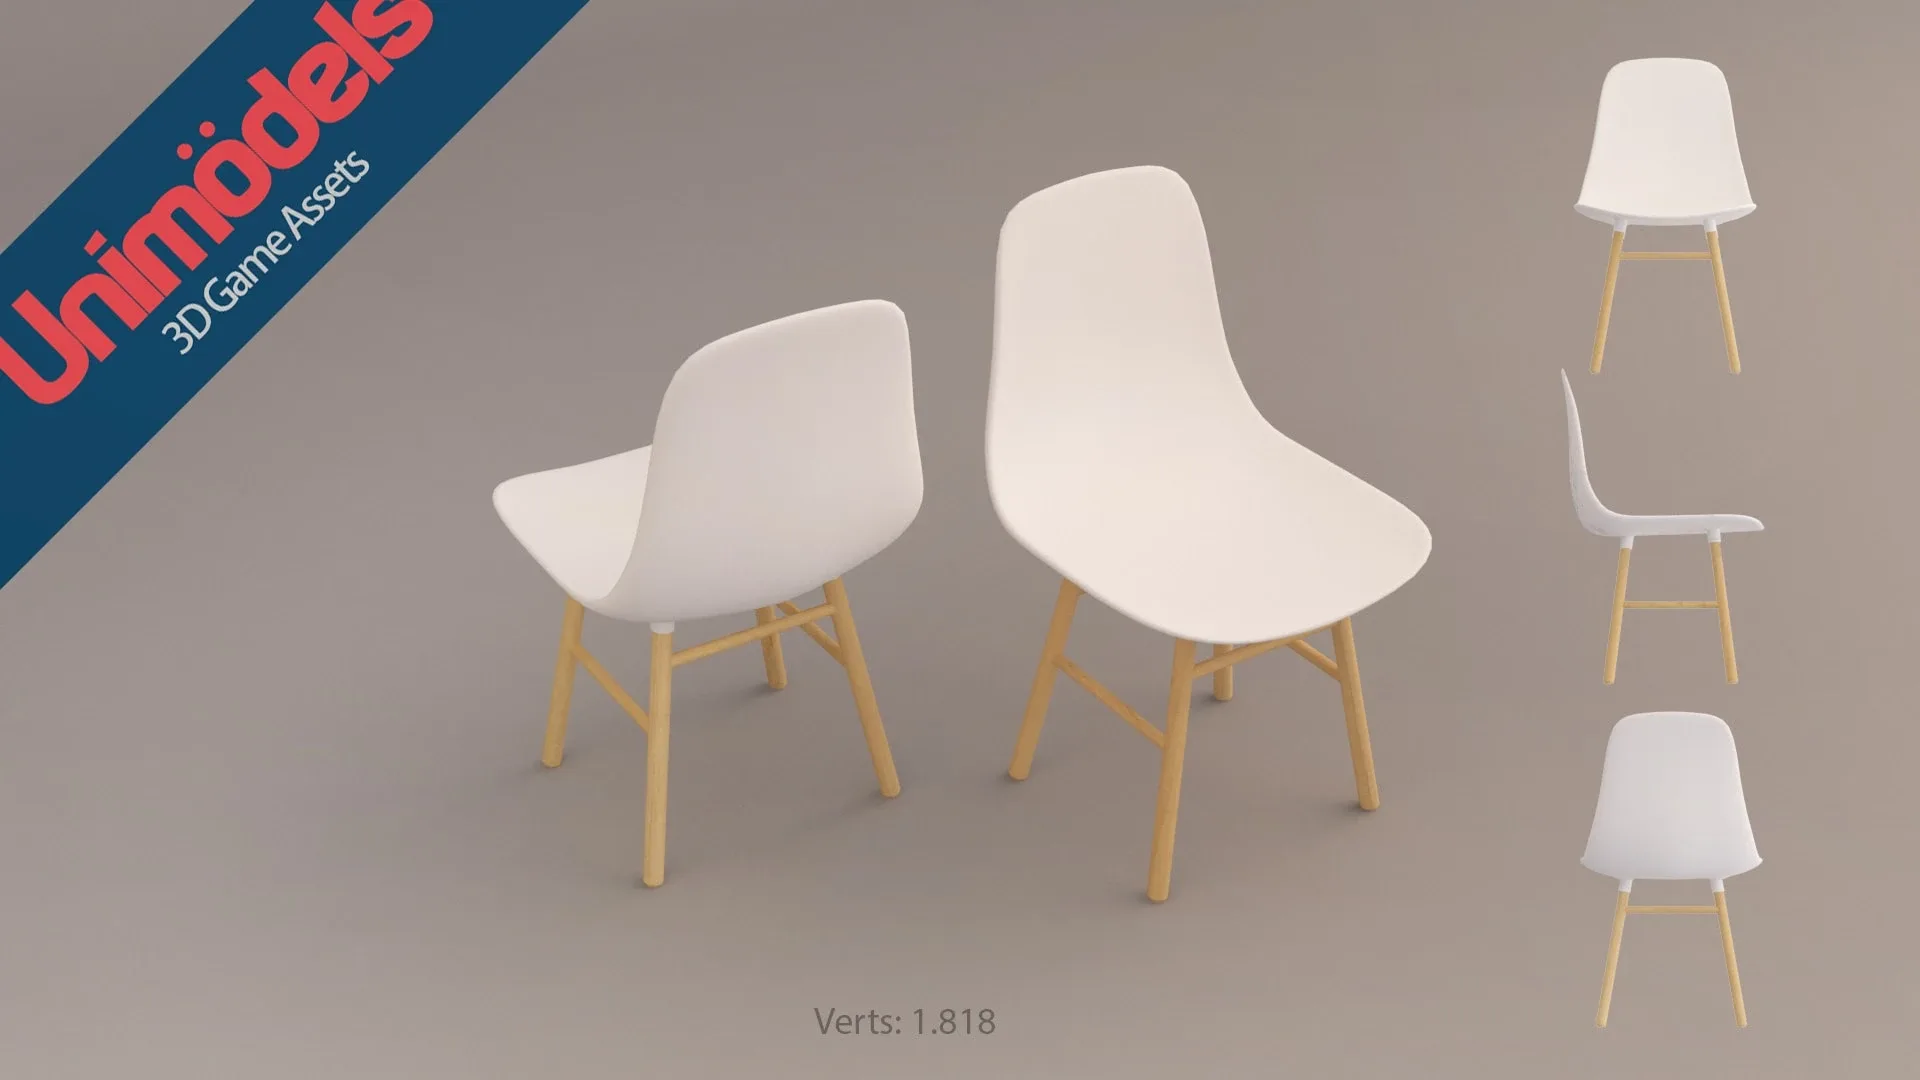 Unimodels Chairs & Tables Vol. 2 for Unity